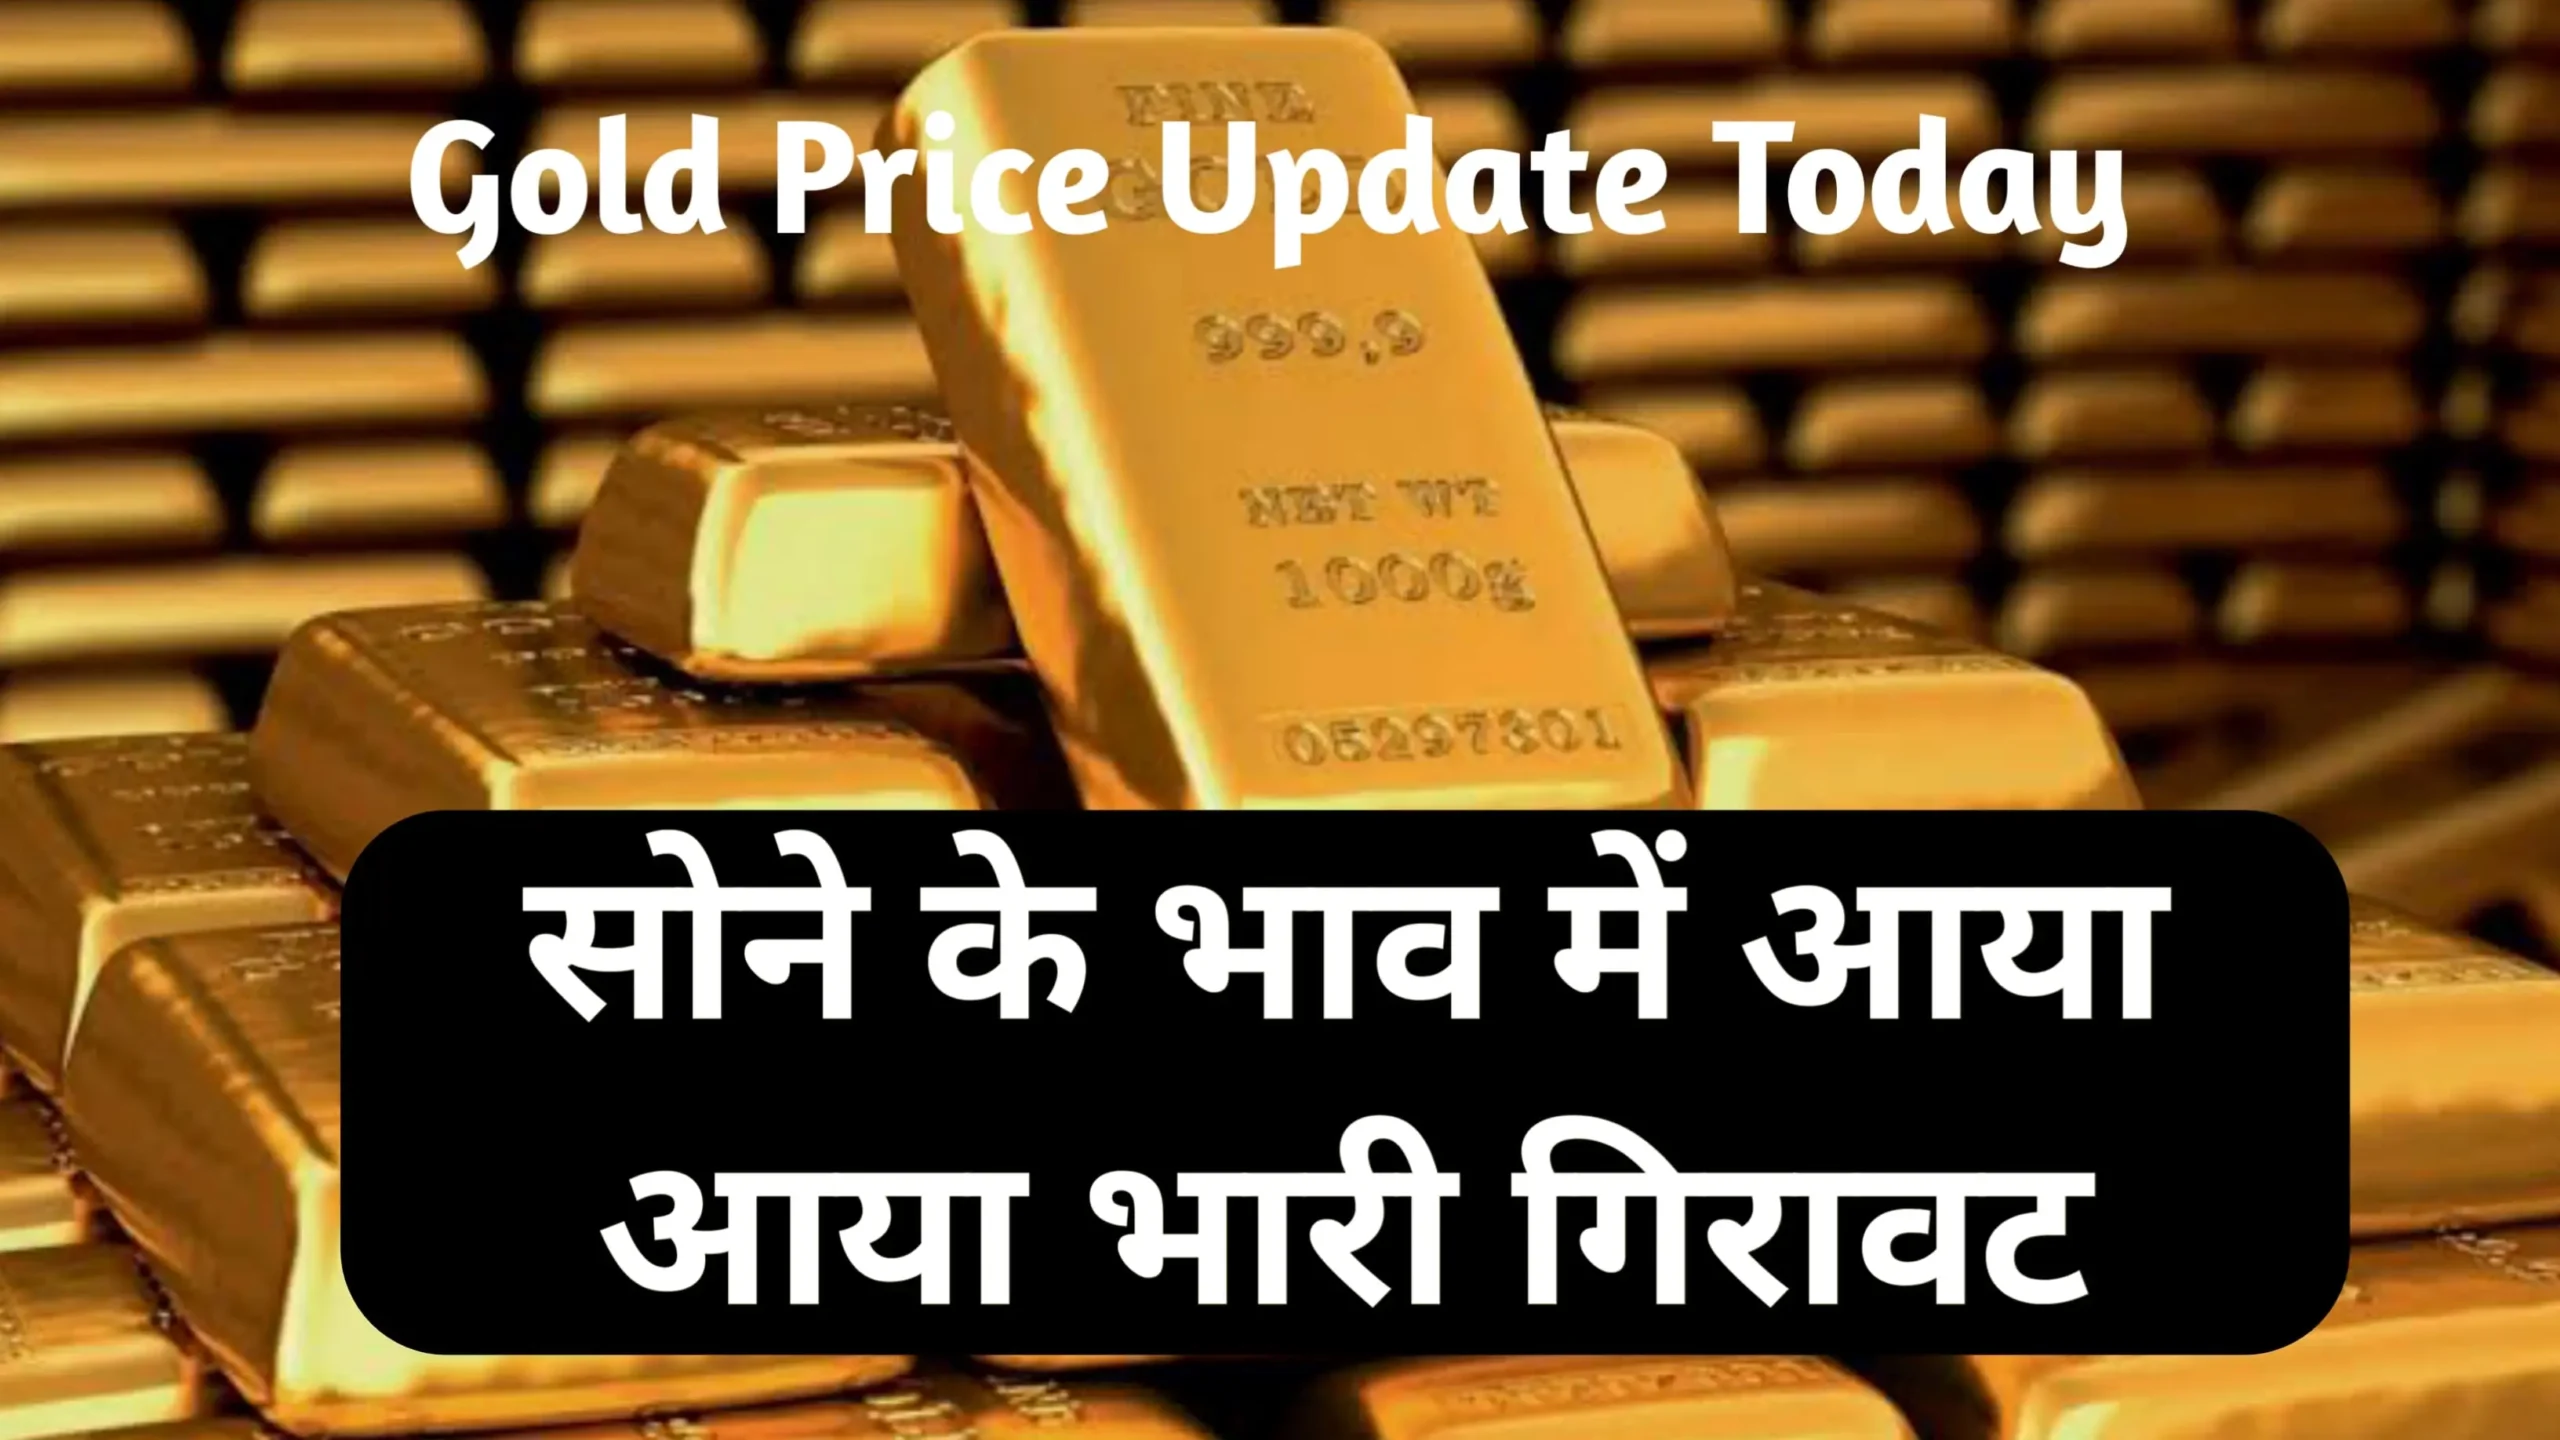 Gold Price Update Today